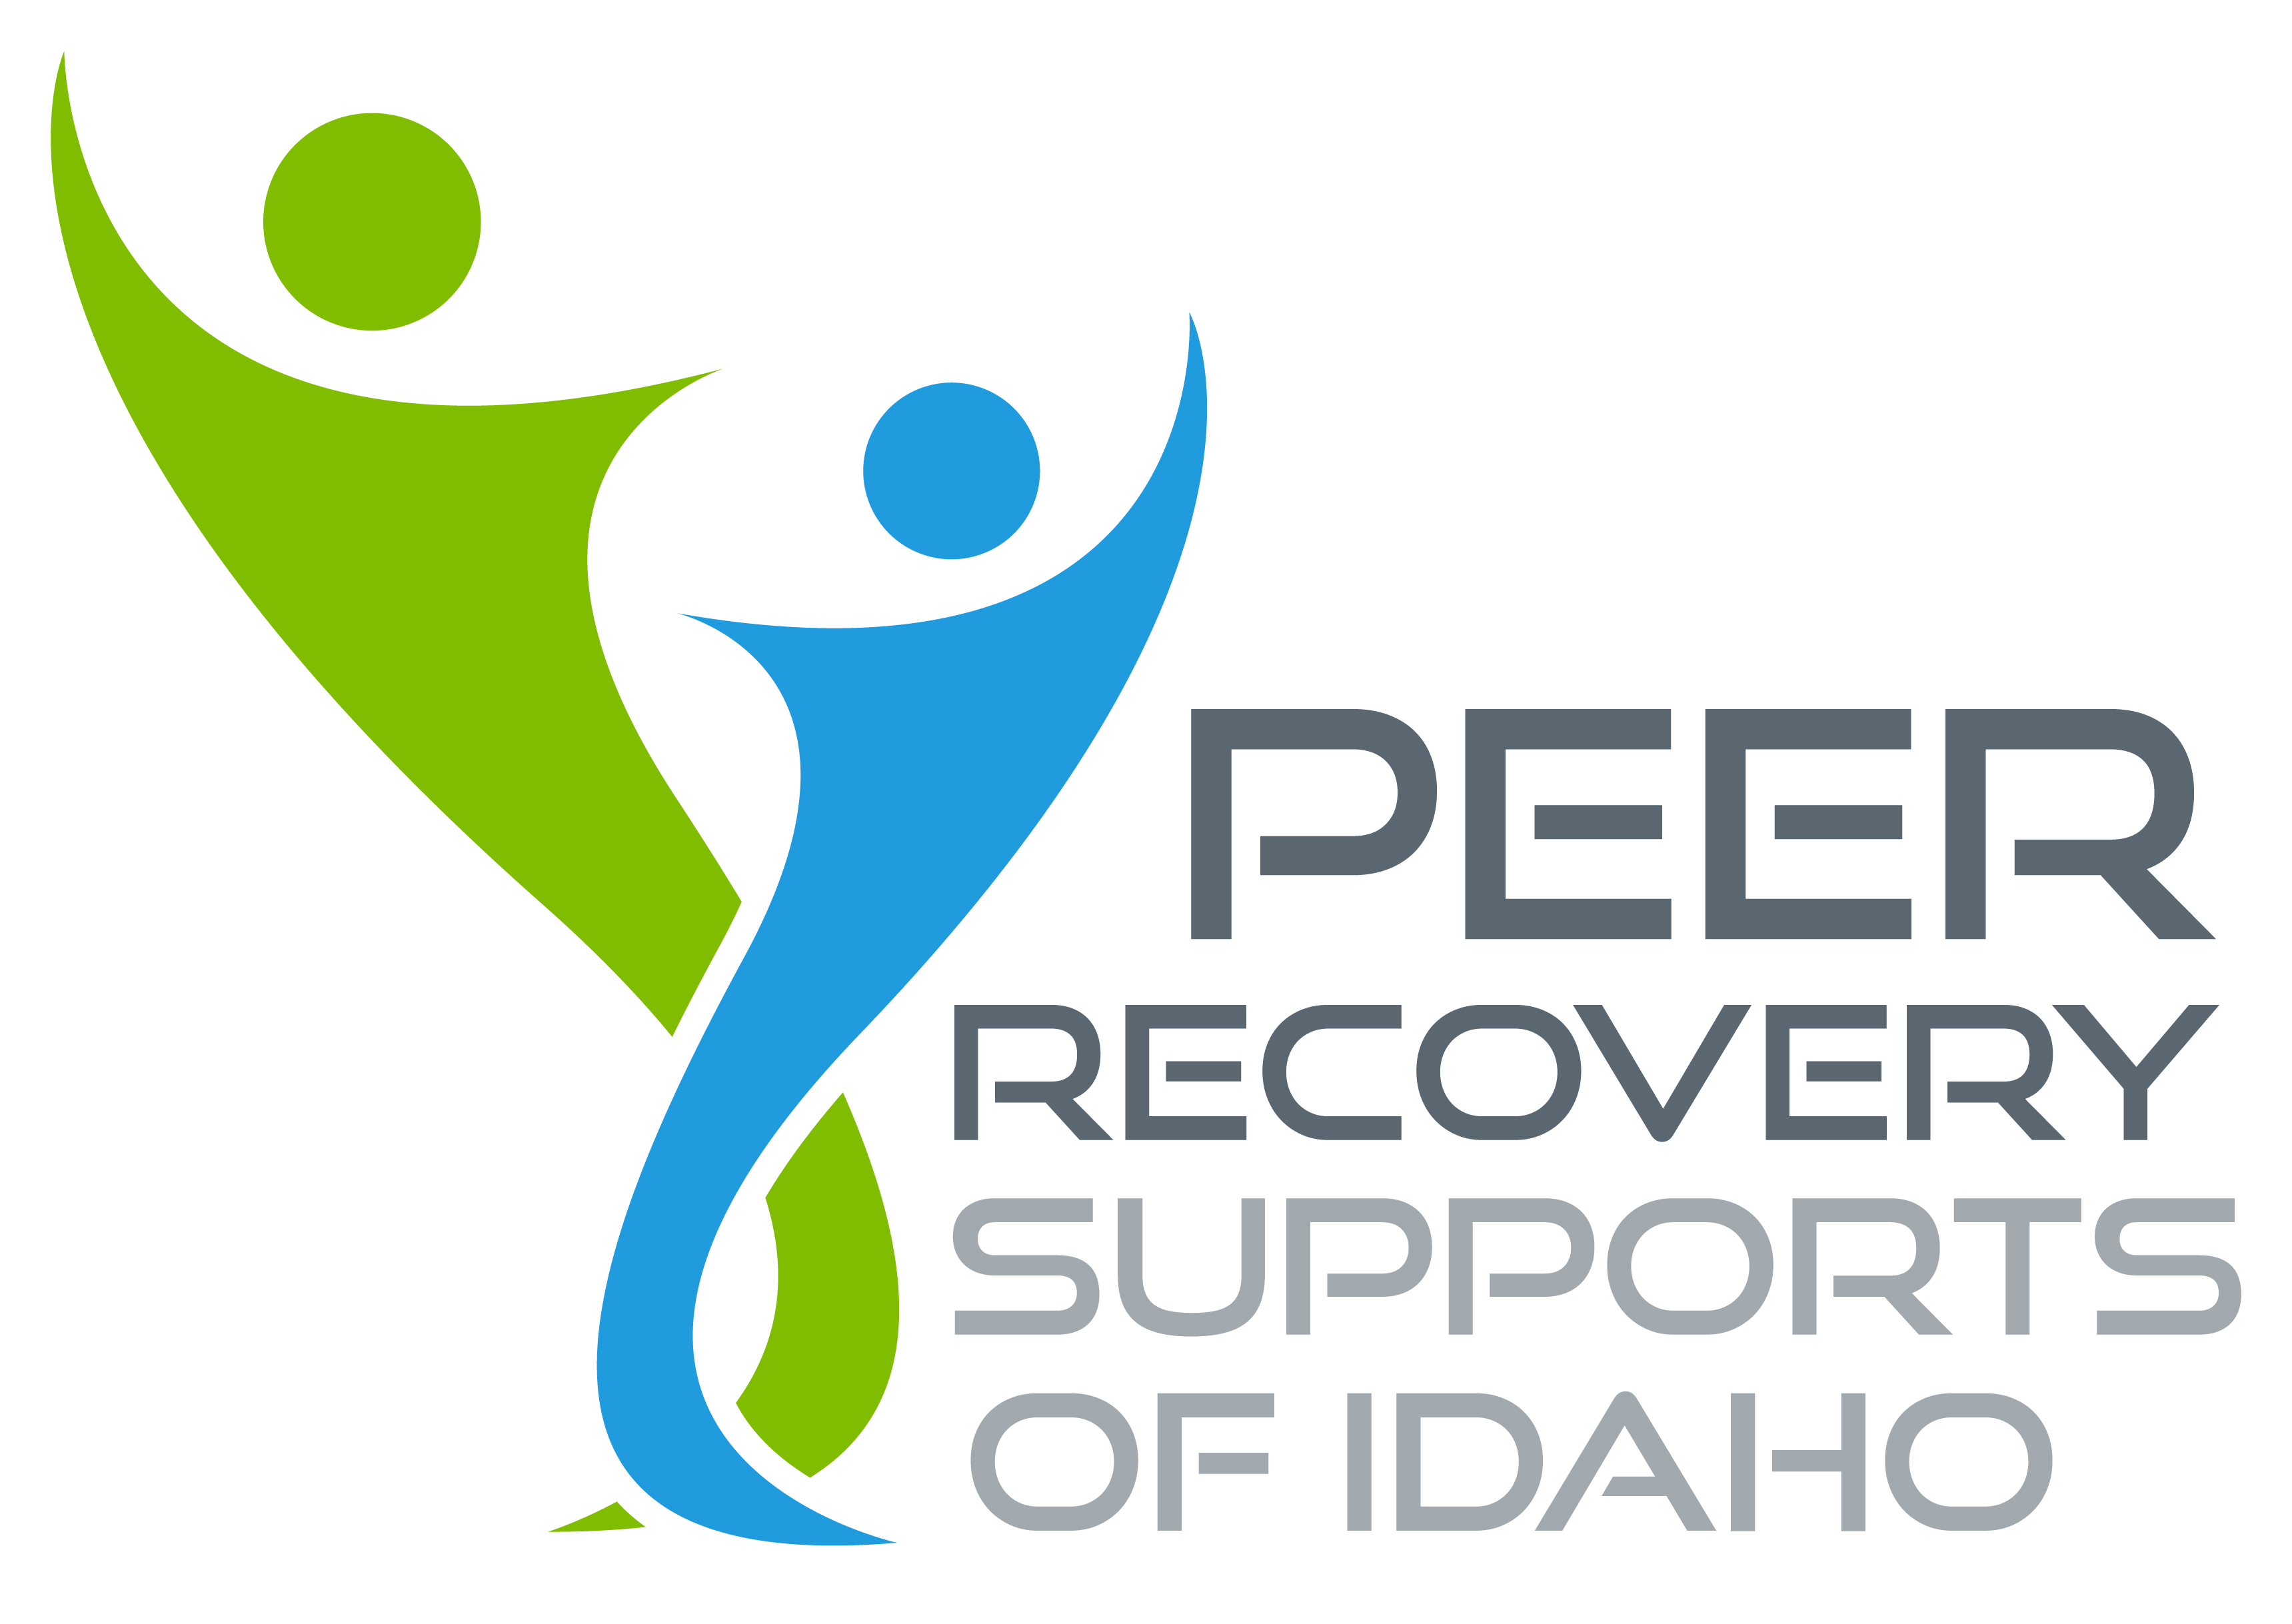 PRSI reconnects individuals who have substance abuse and/or co-occurring behavioral health disorders with their family, community and desired life direction in a person-centered recovery approach.